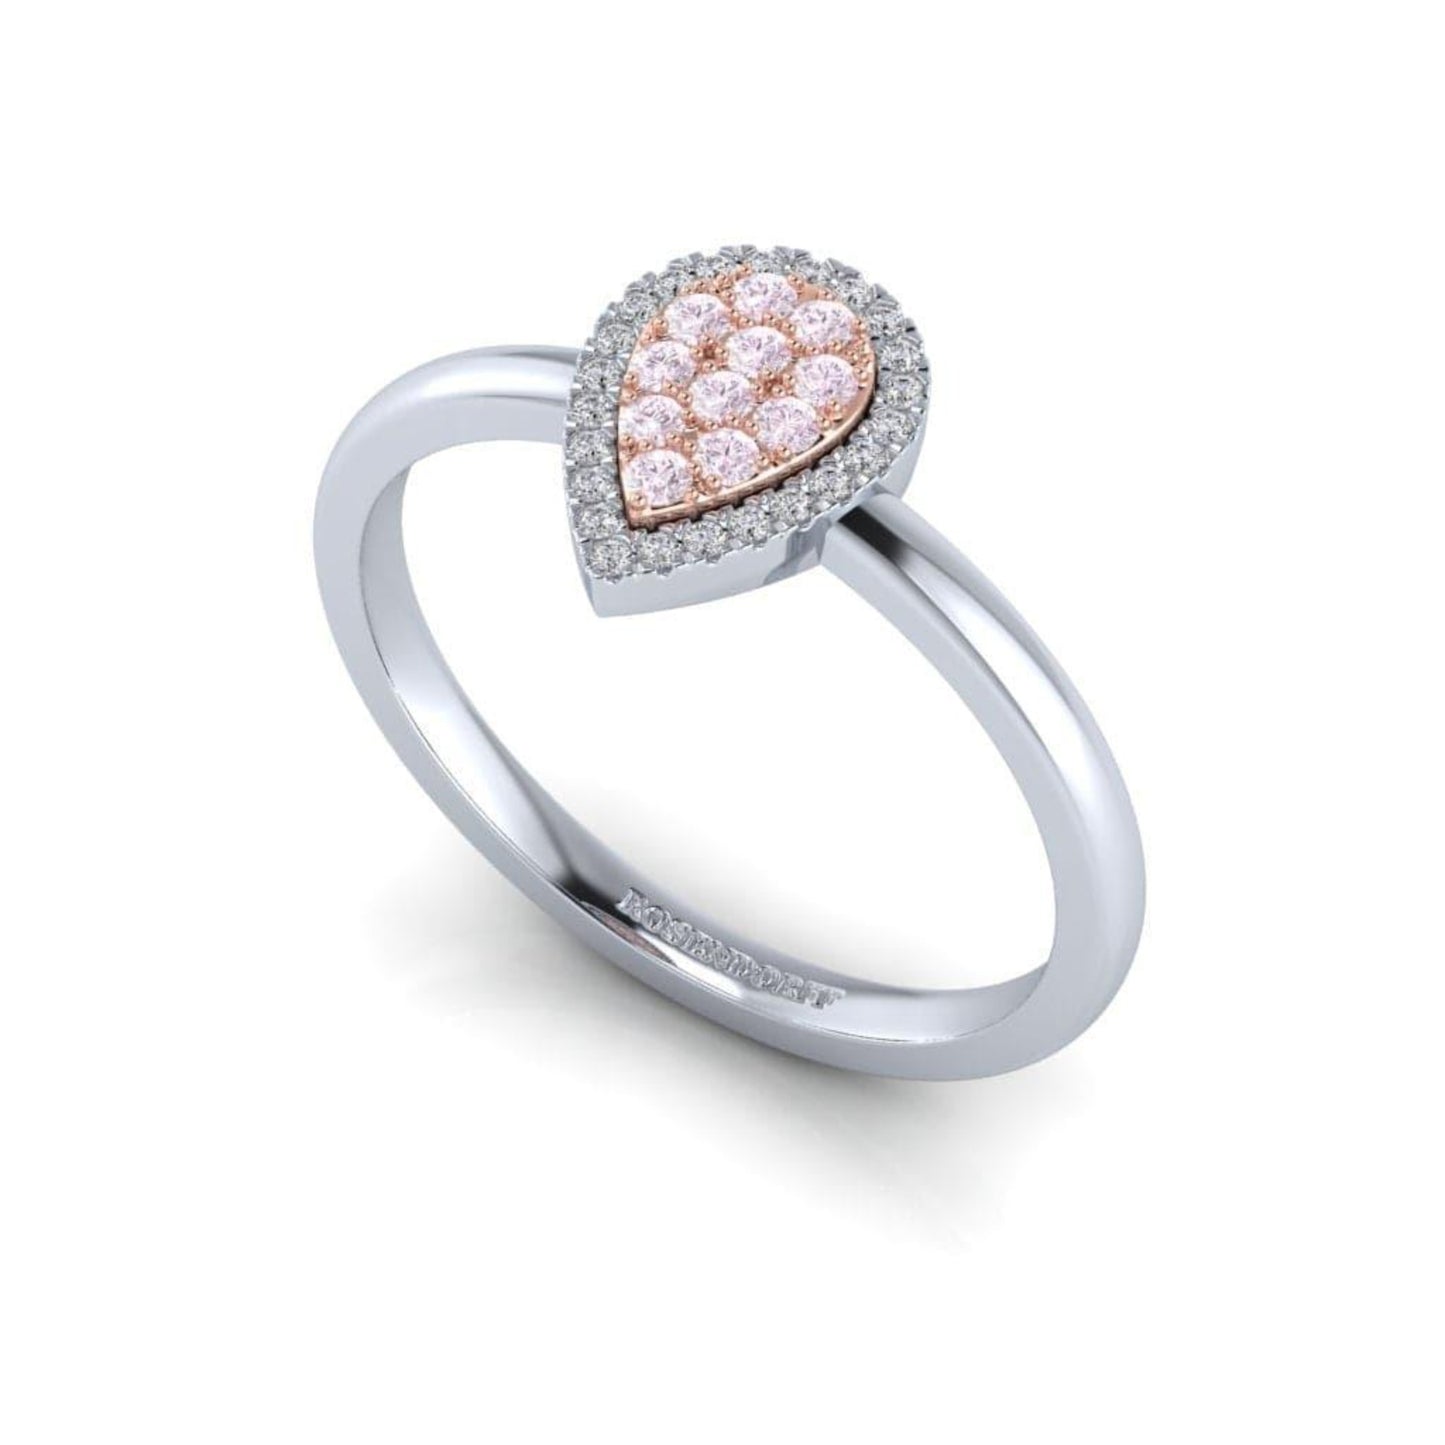 Eminence Pinks Pear Ring